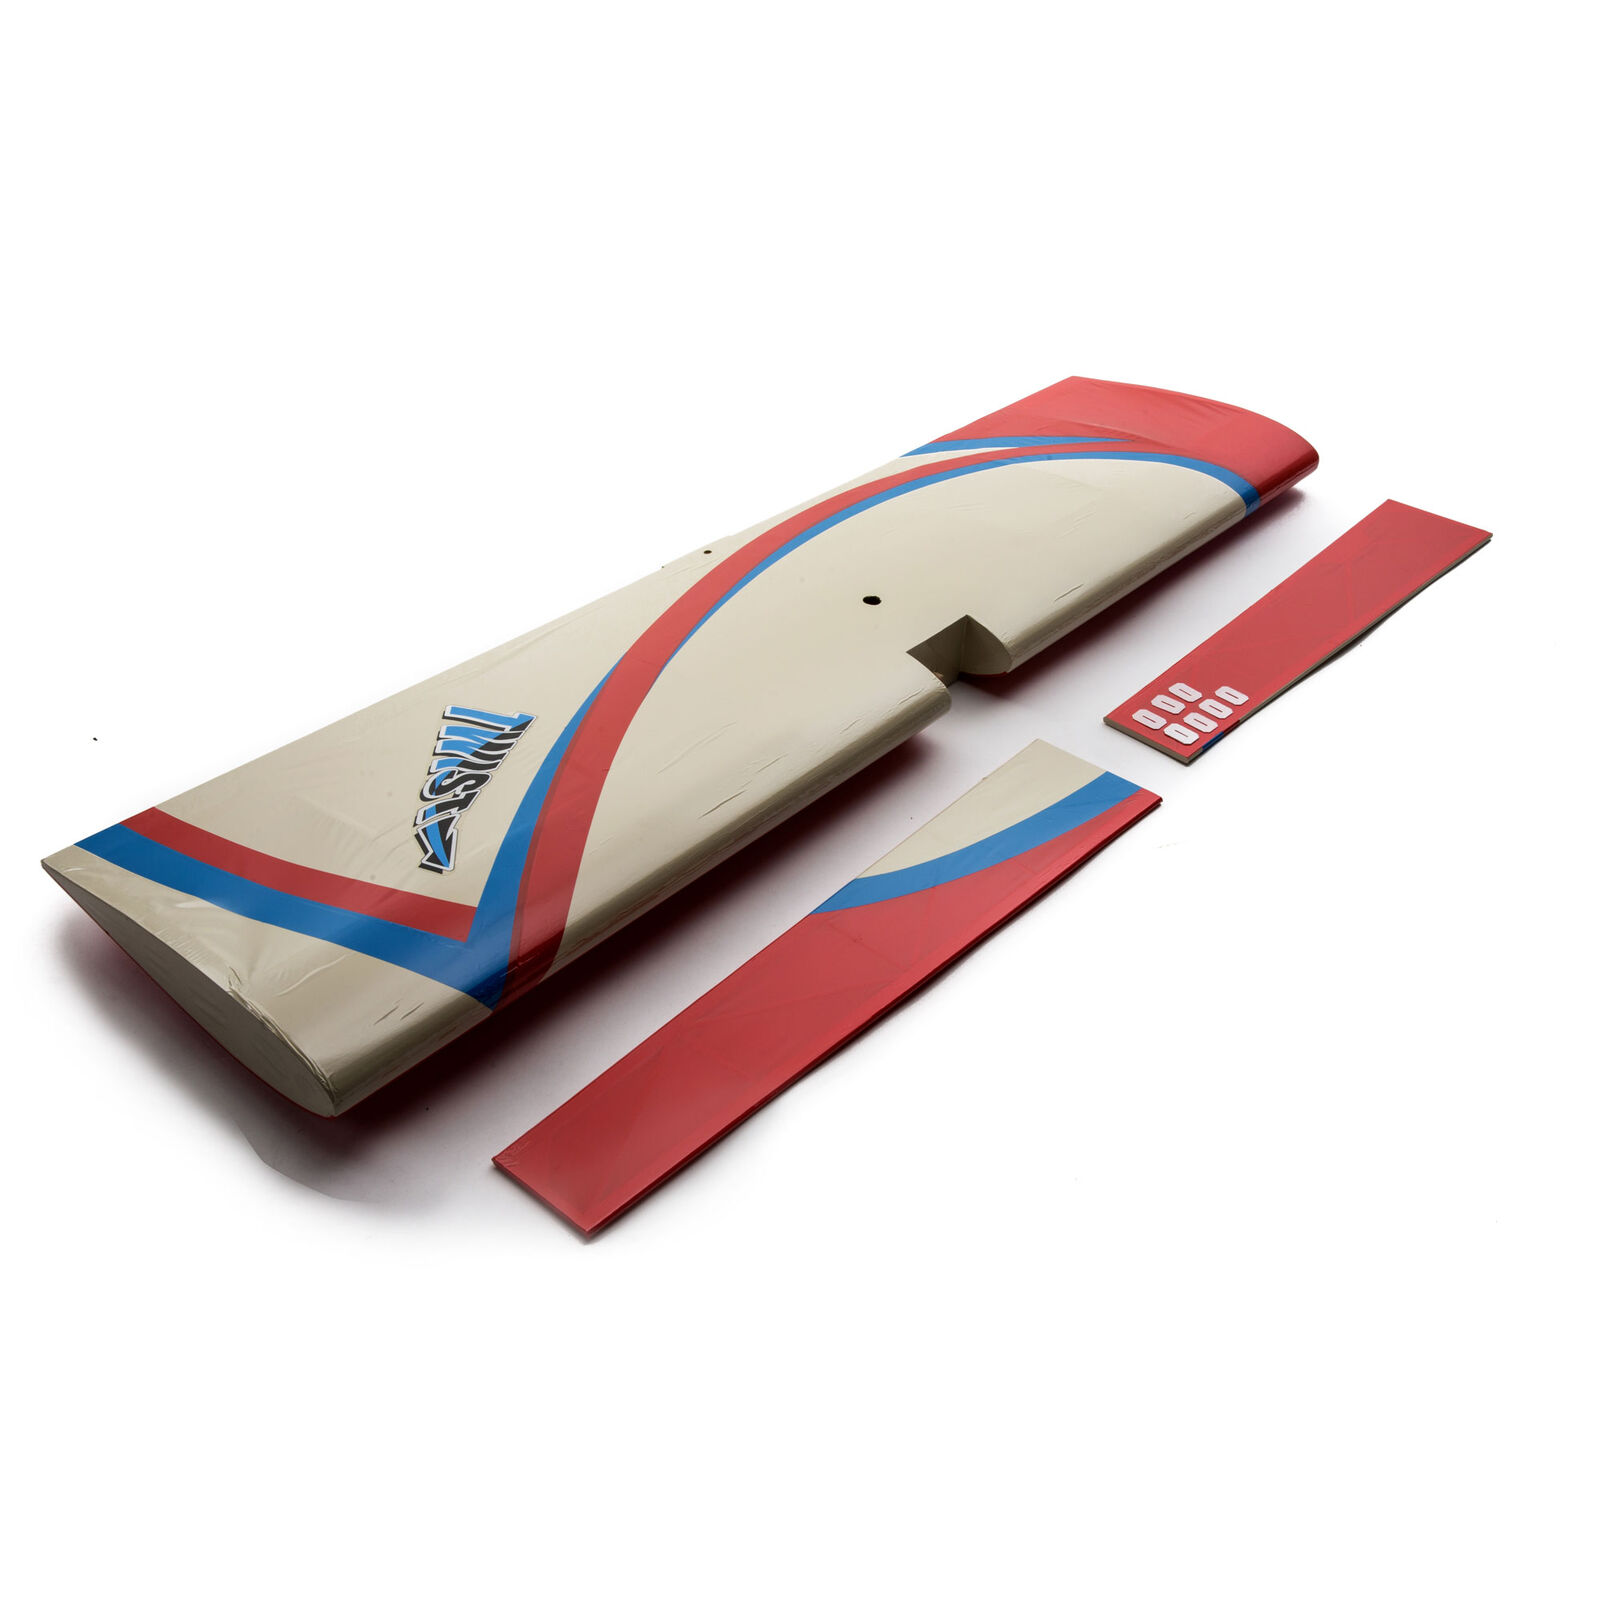 Main Wing Set with Ailerons: Twist 40 V2